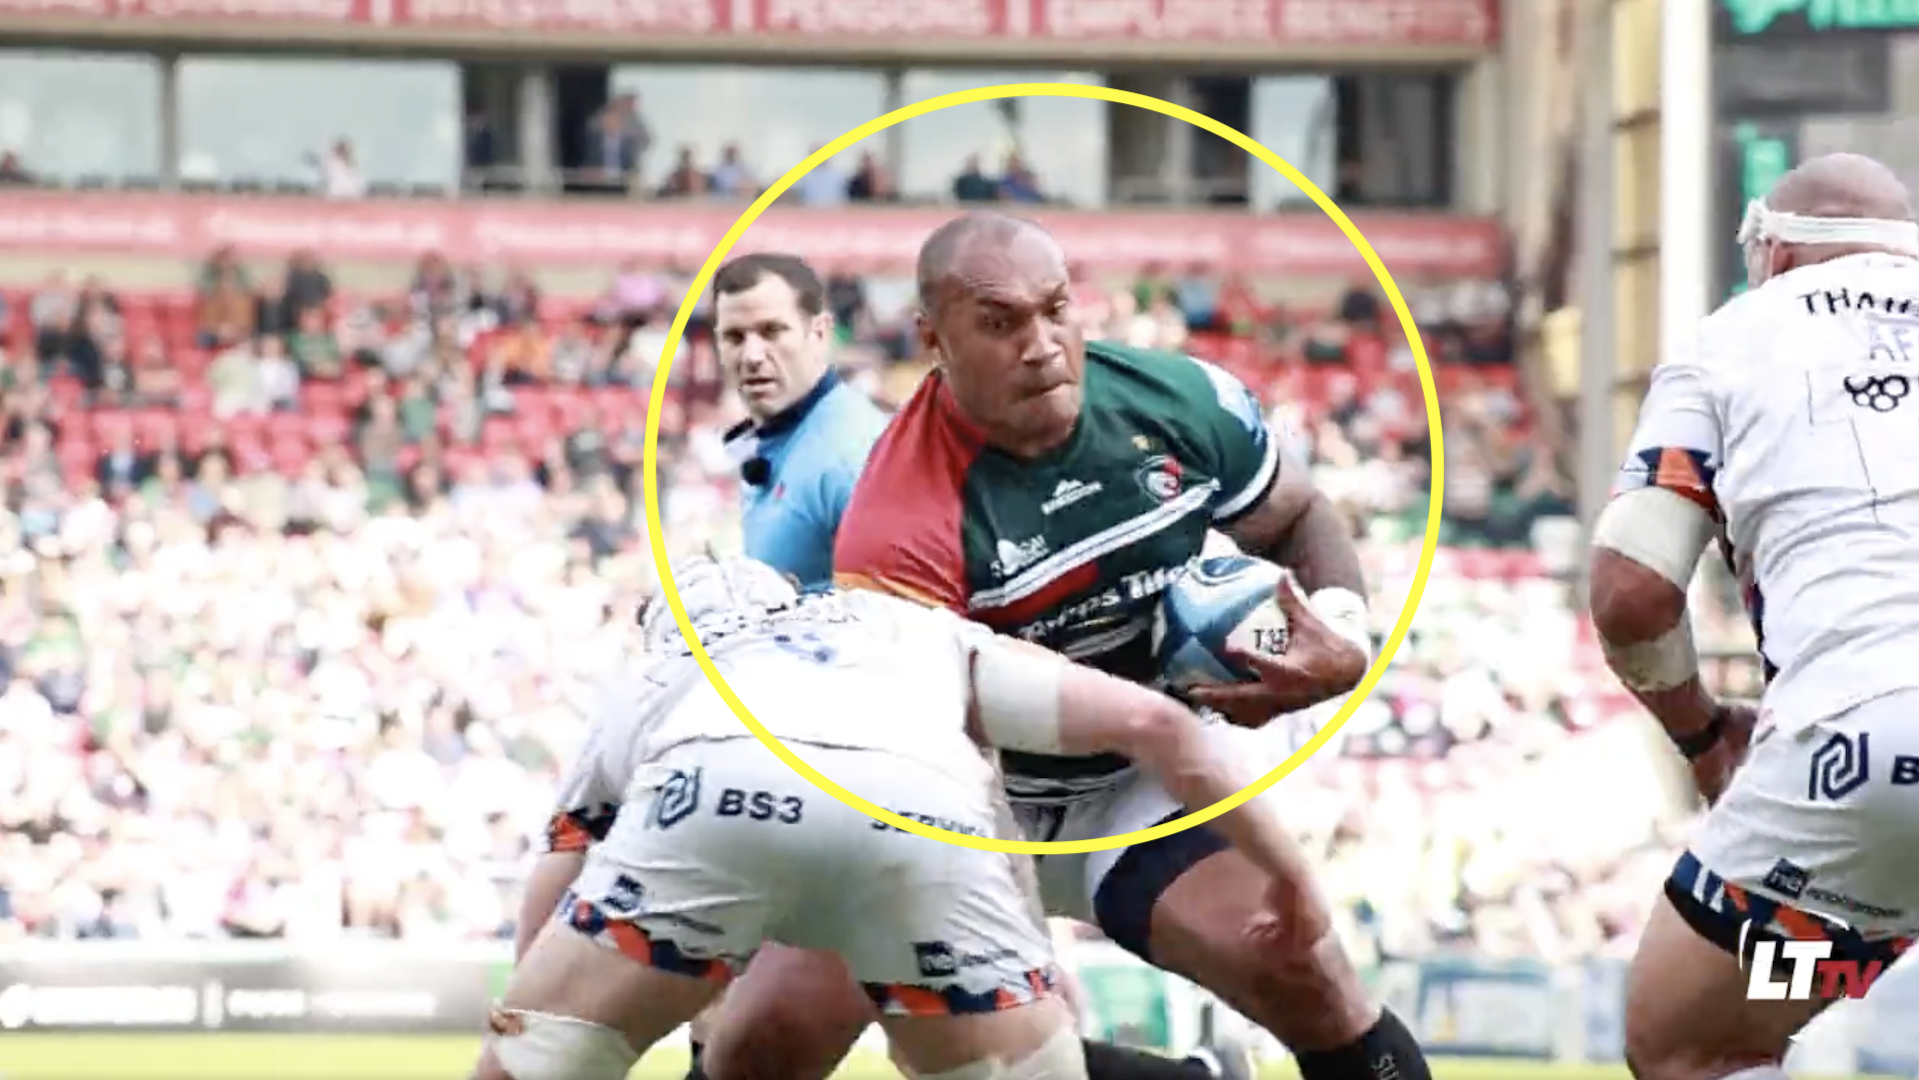 Barbaric highlights reel shows why the Premiership is glad Nadolo has gone